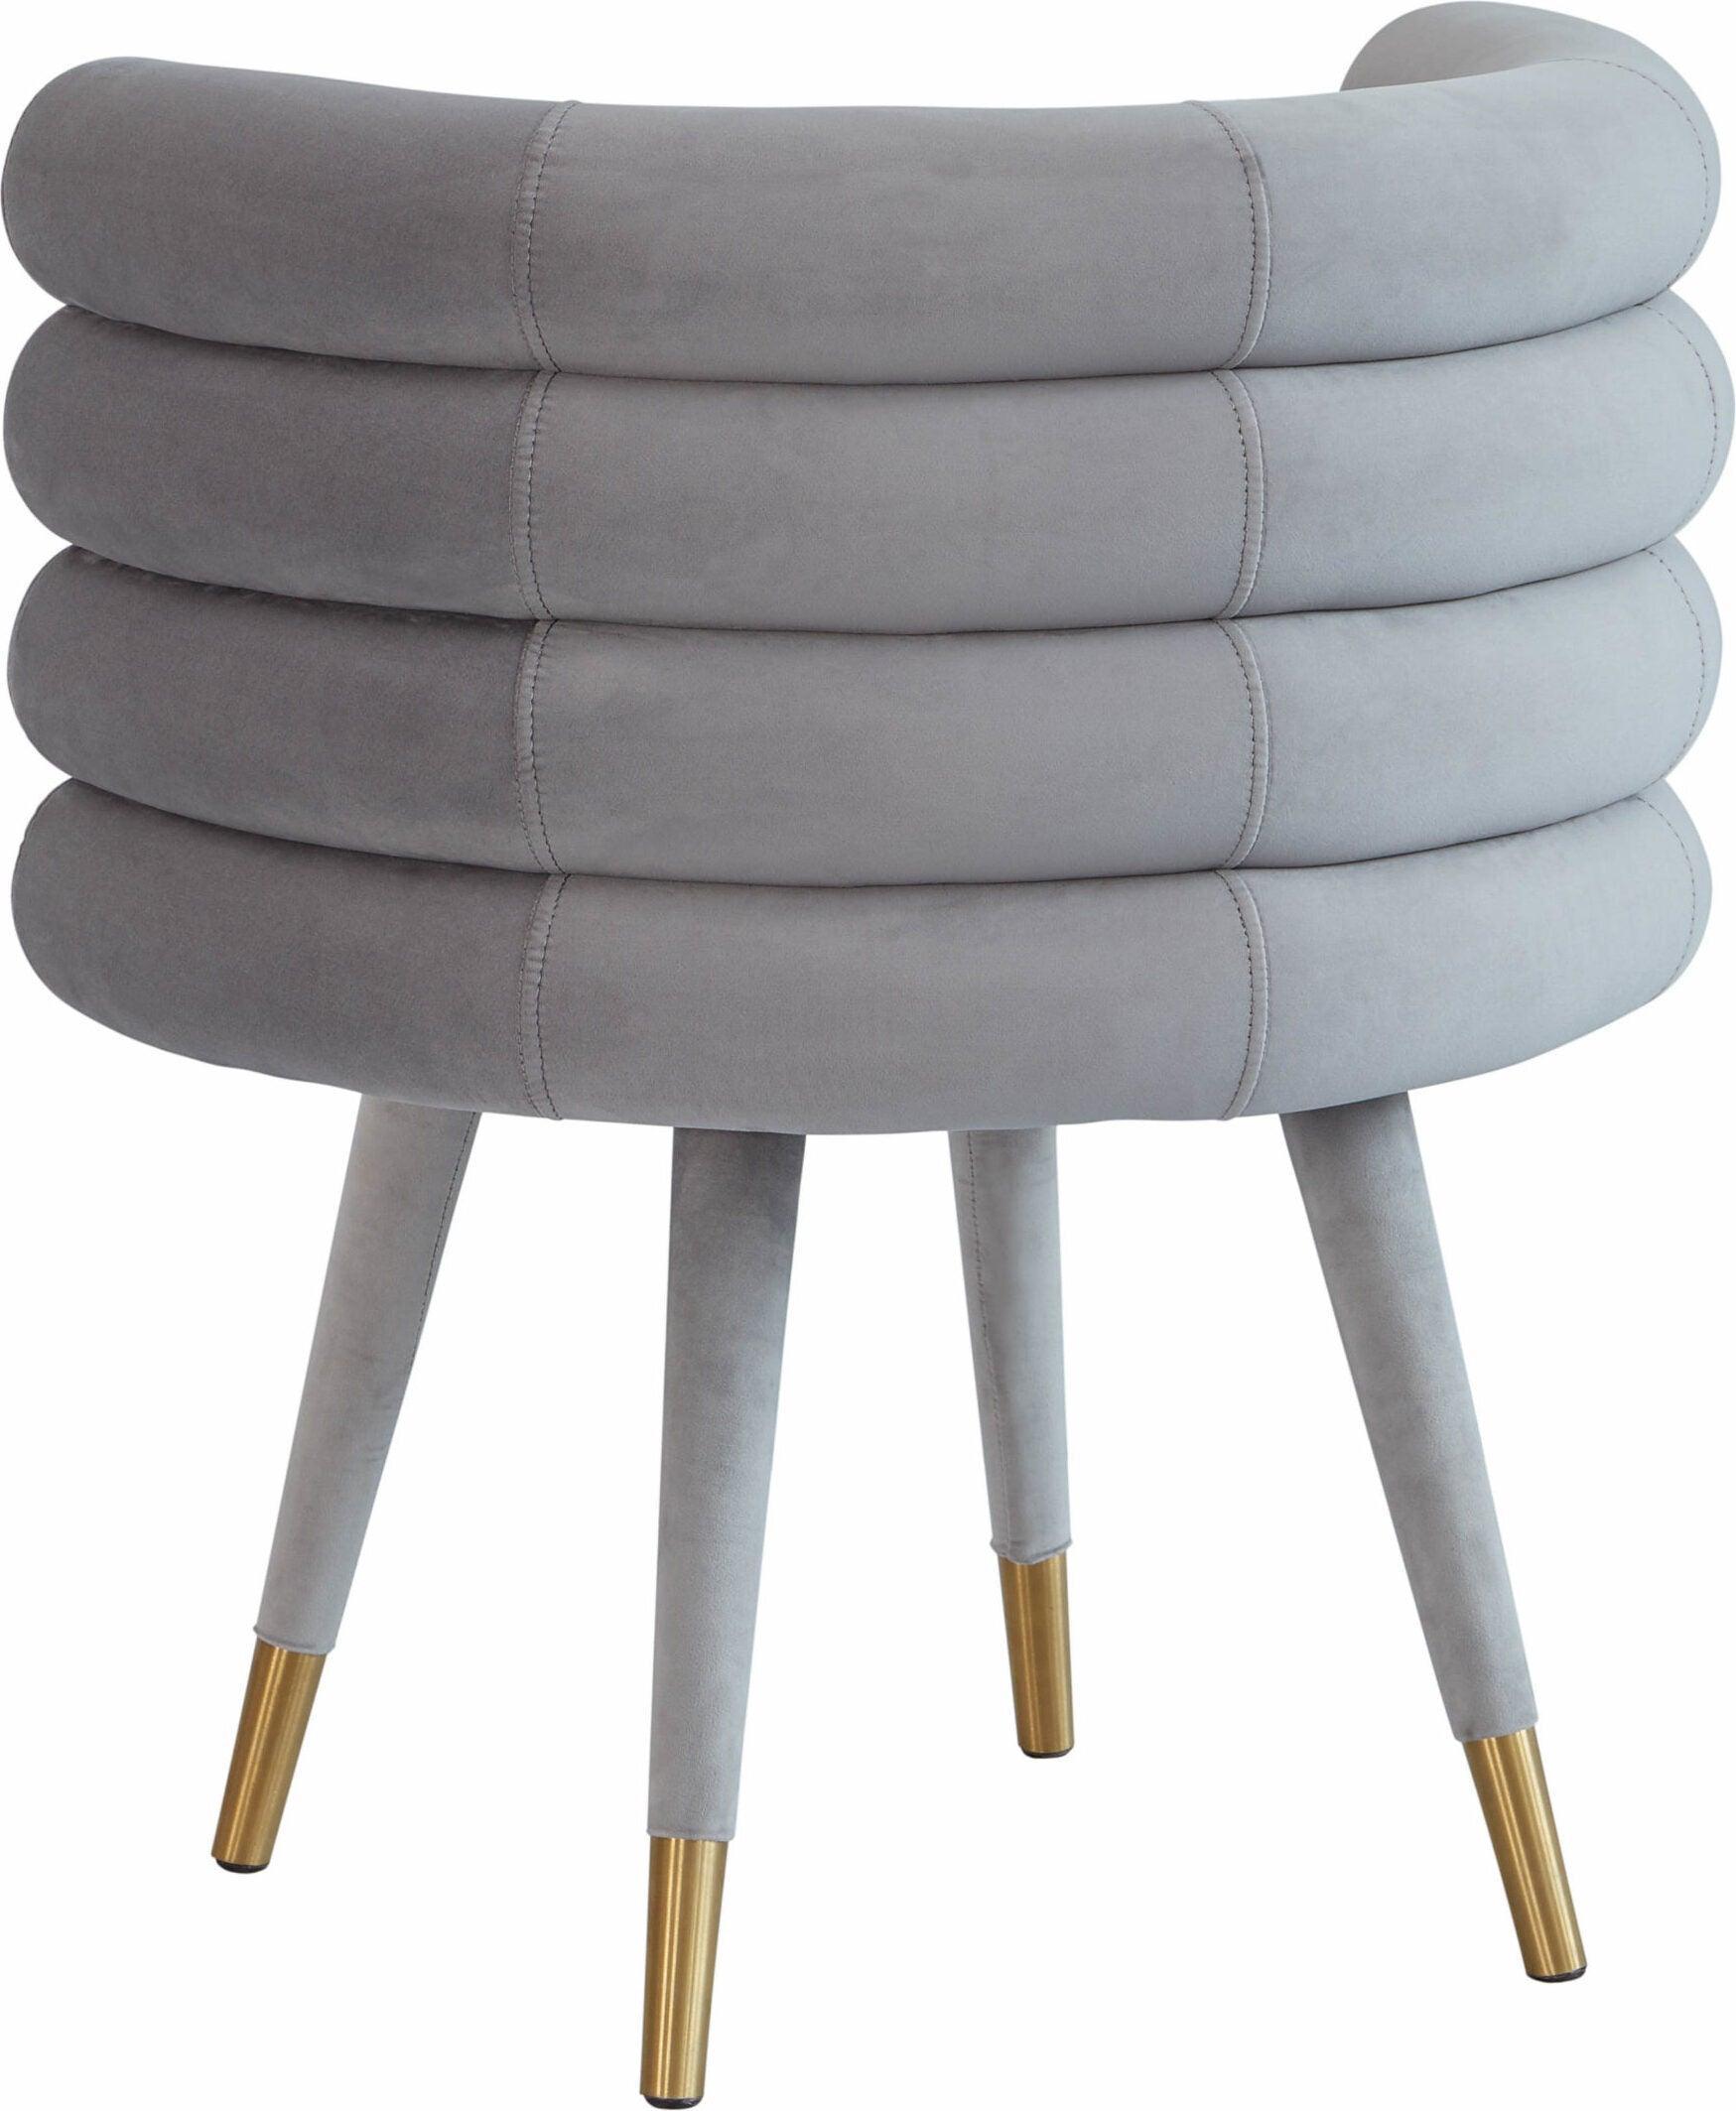 Tov Furniture Dining Chairs - Betty Gray Velvet Dining Chair